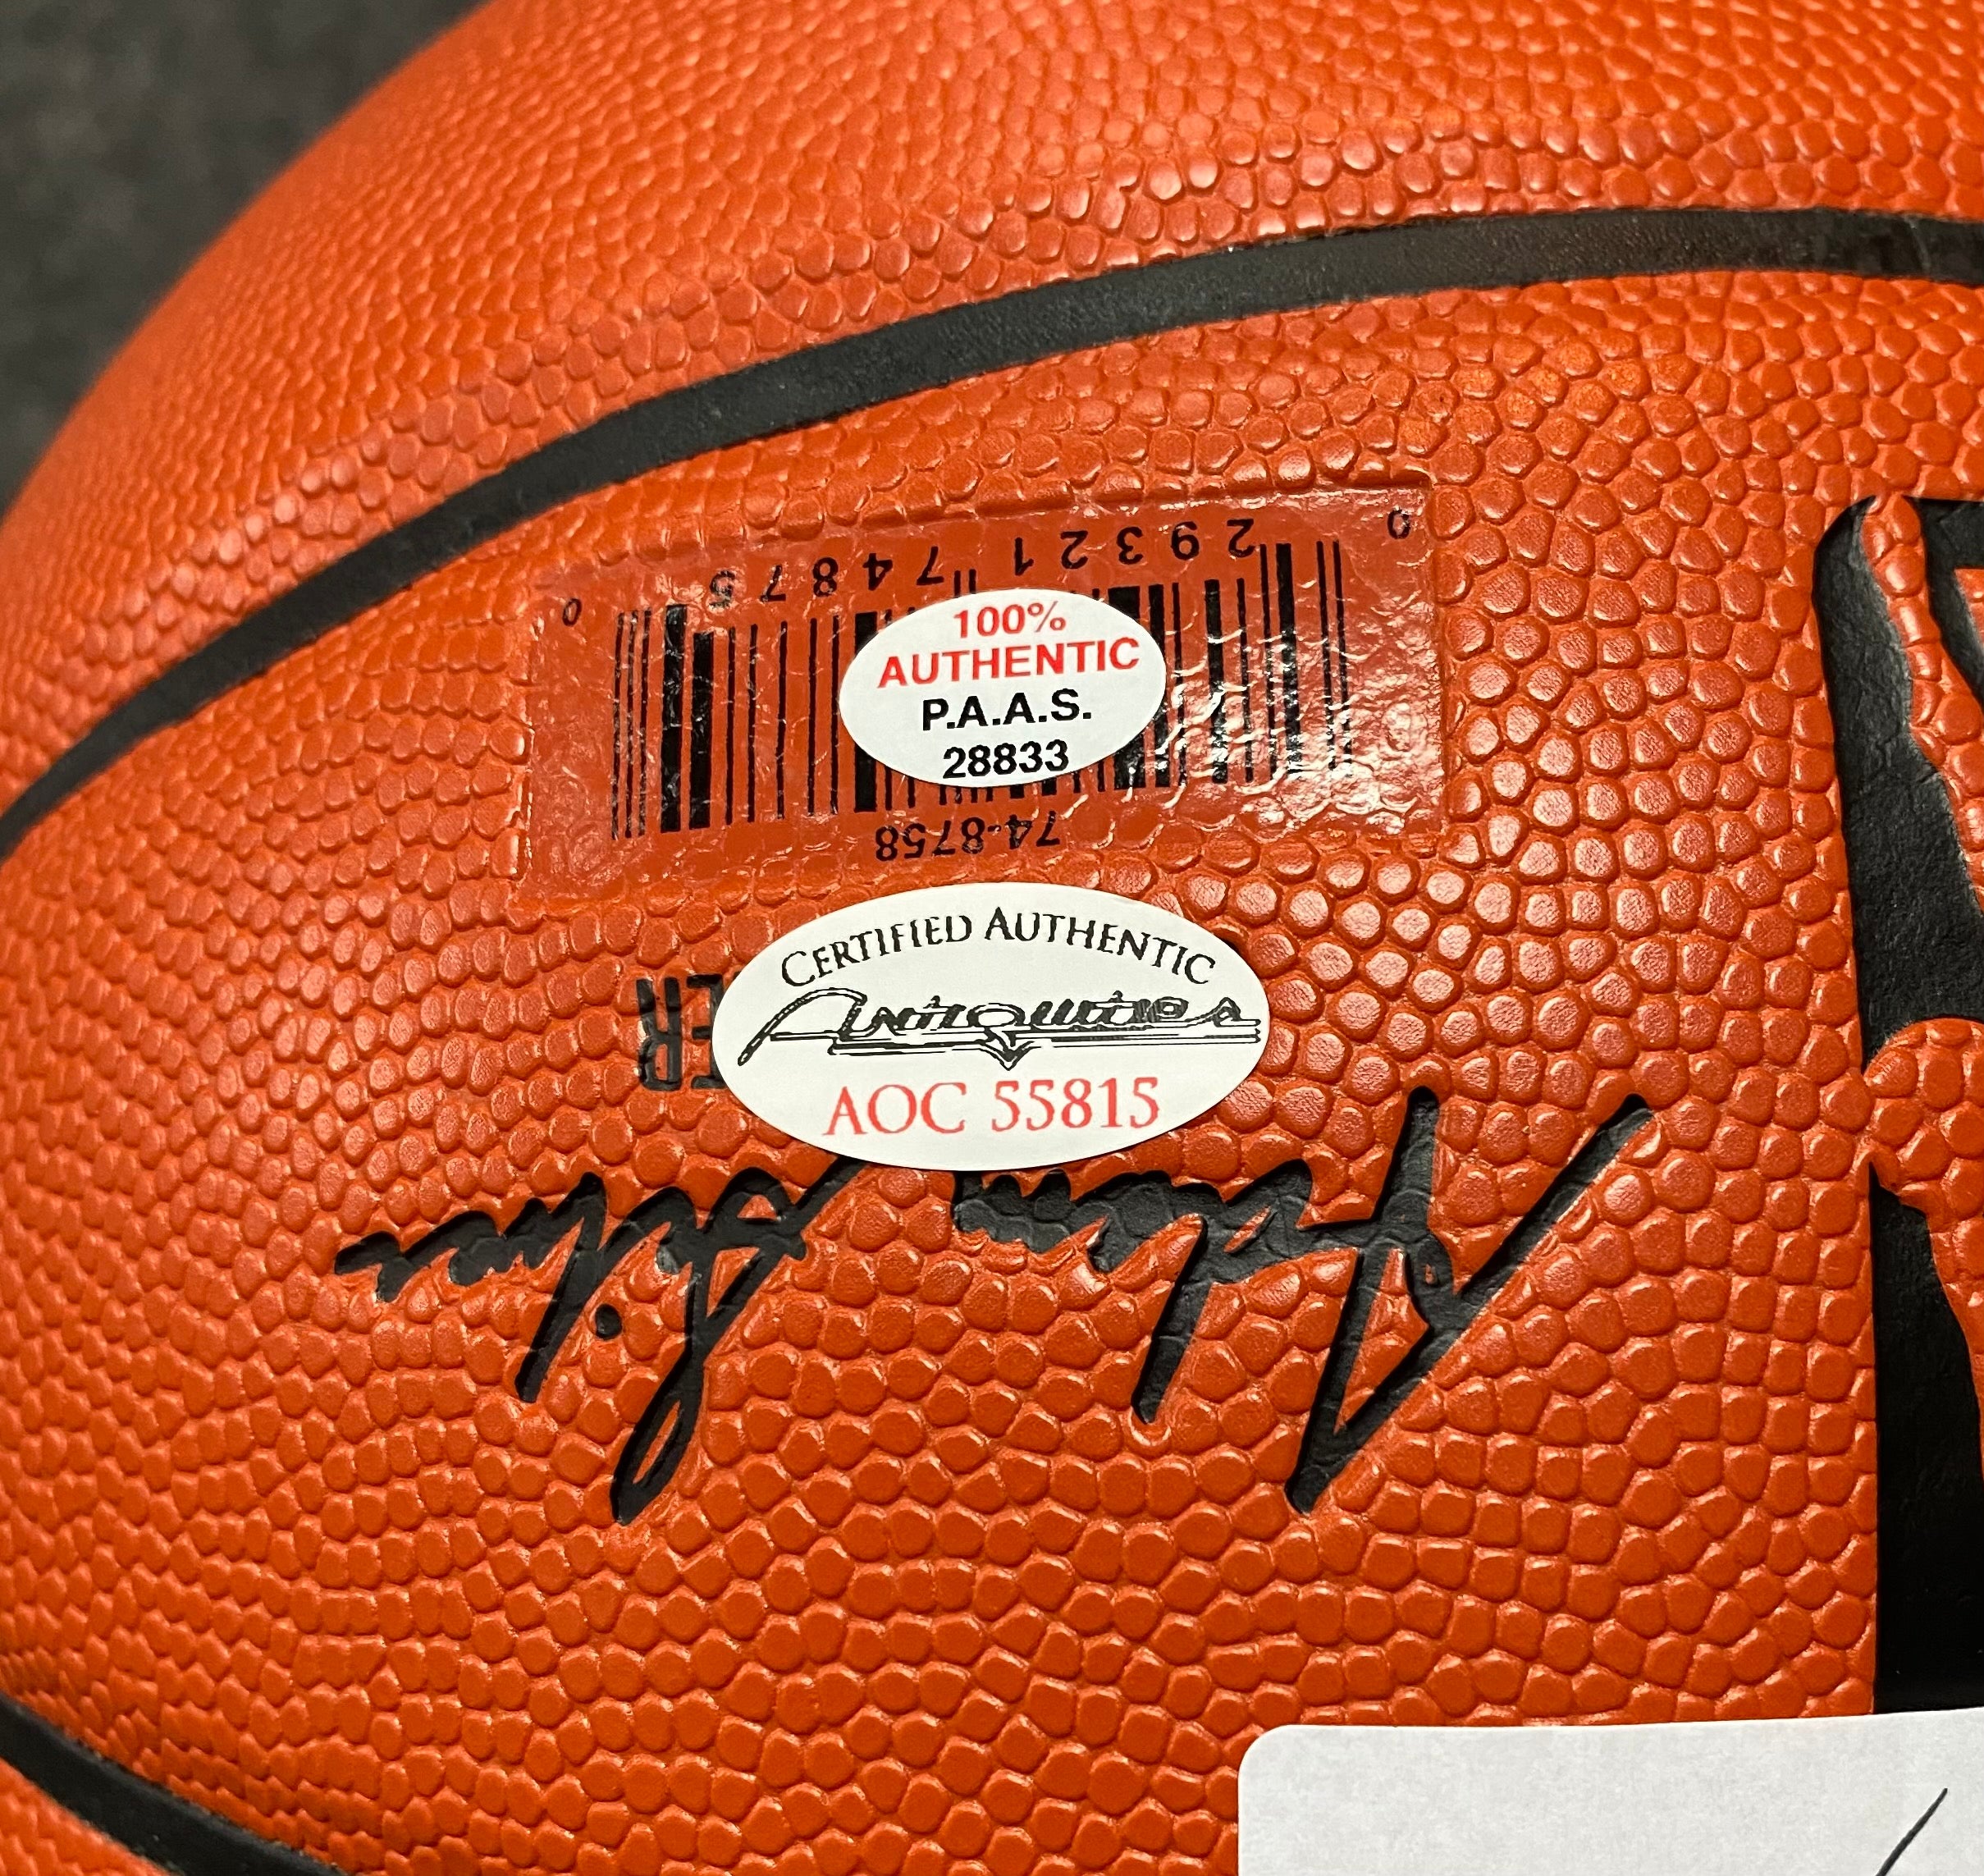 Stephen Curry NBA Autographed Basketballs for sale